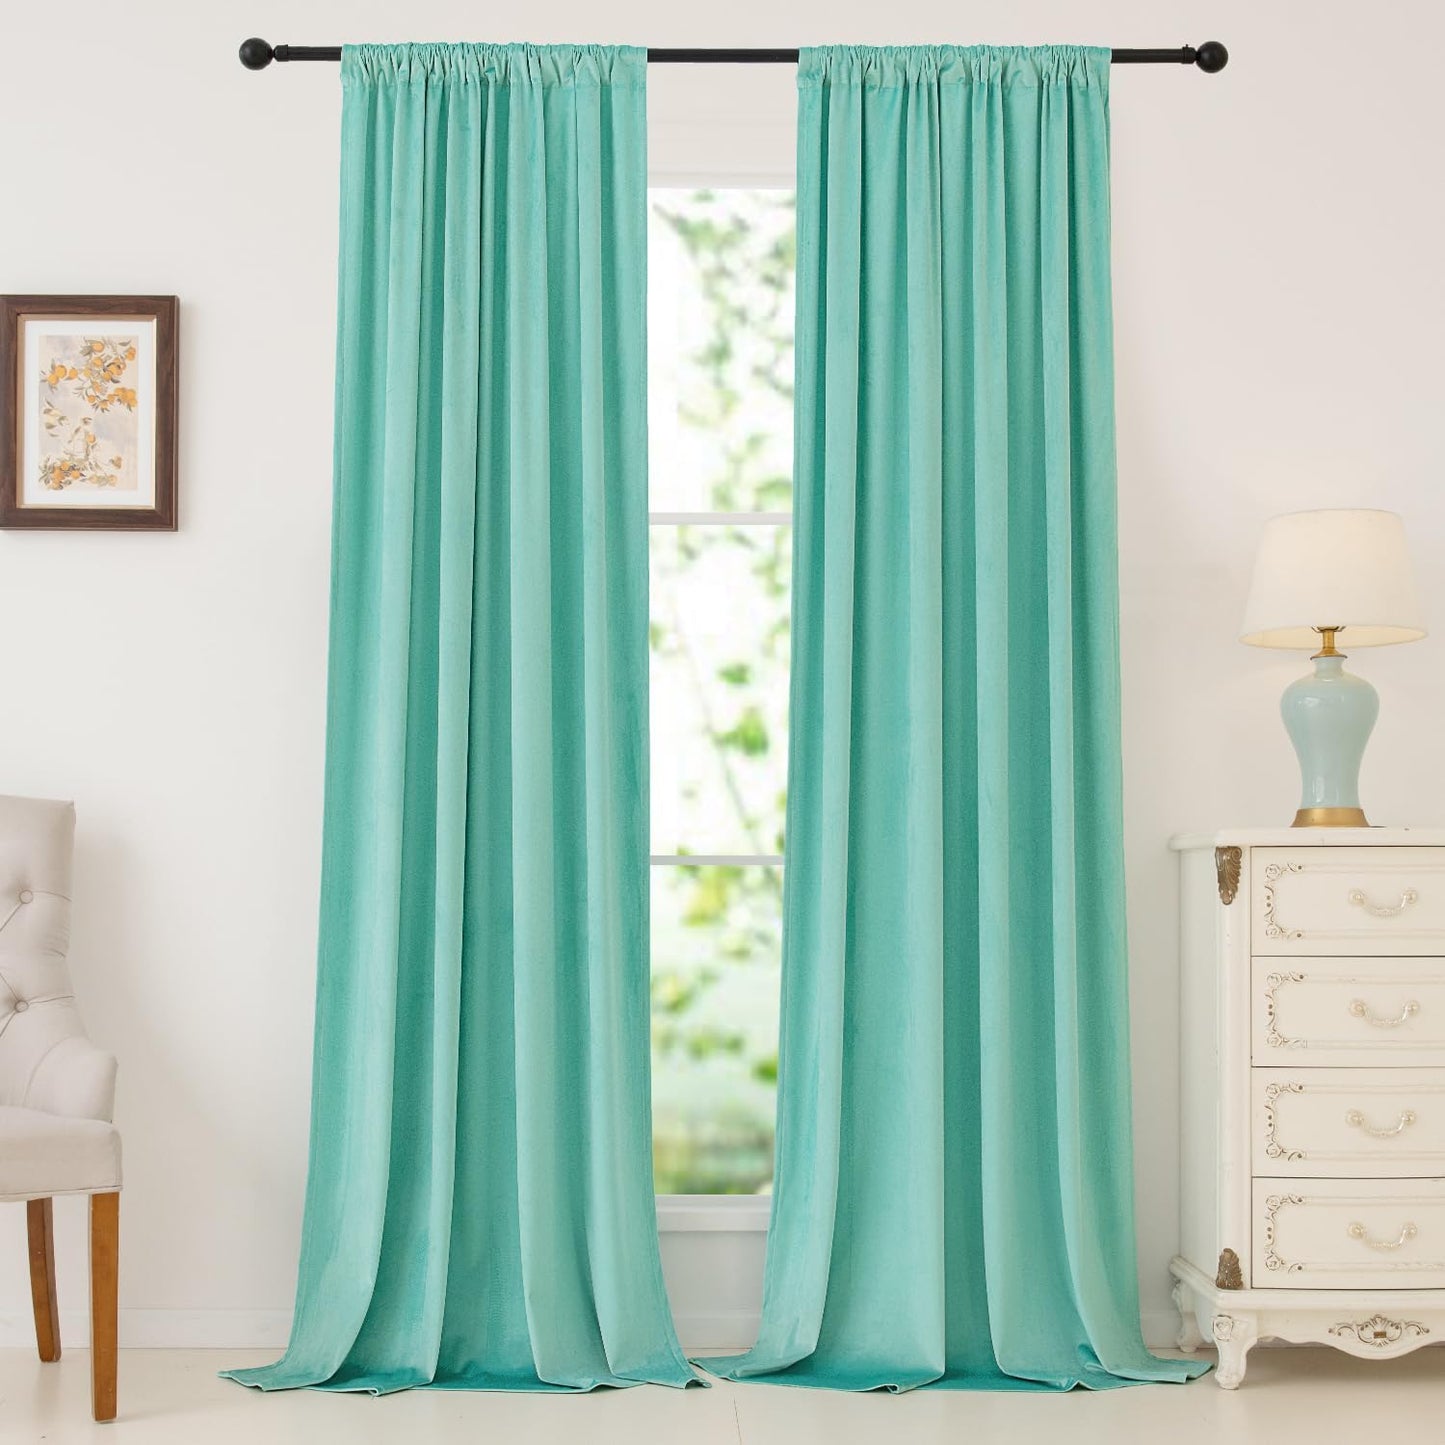 Nanbowang Green Velvet Curtains 63 Inches Long Dark Green Light Blocking Rod Pocket Window Curtain Panels Set of 2 Heat Insulated Curtains Thermal Curtain Panels for Bedroom  nanbowang Aqua 52"X120" 